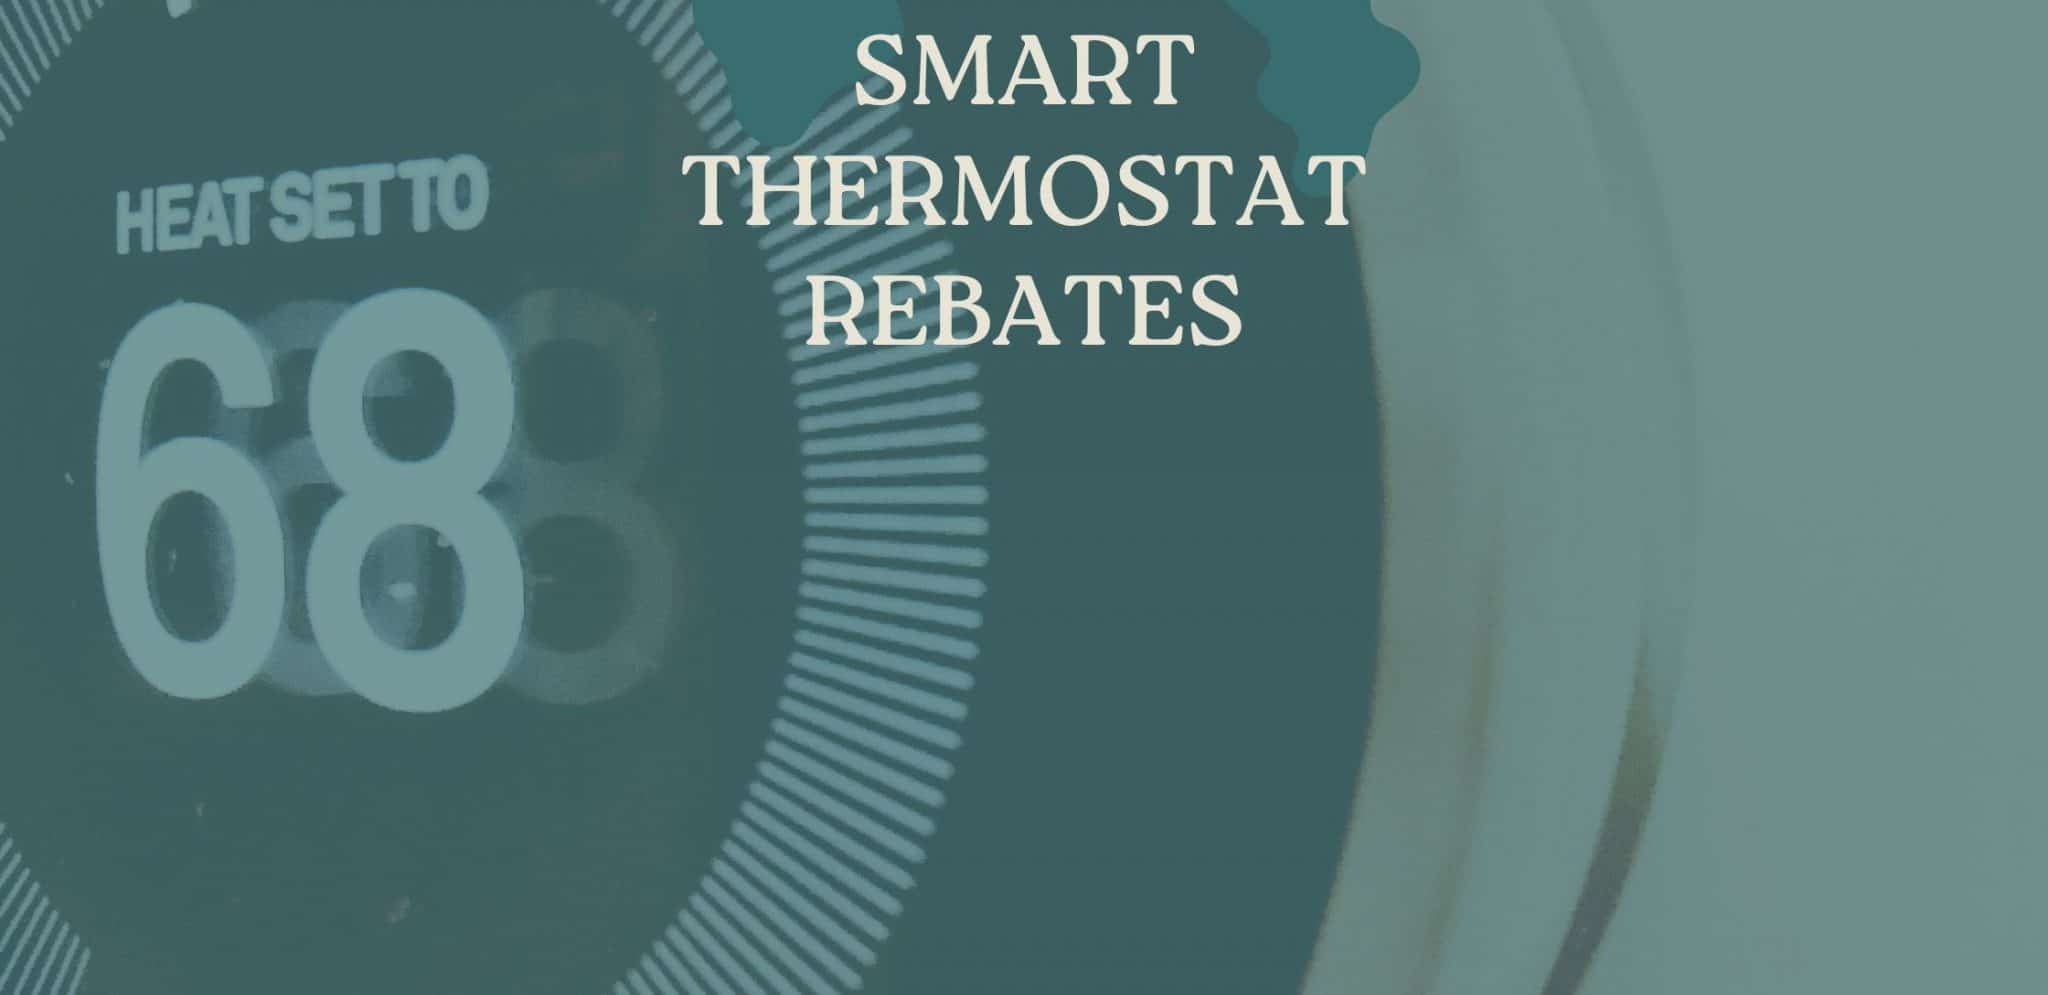 pse-instant-rebate-for-mysa-smart-thermostats